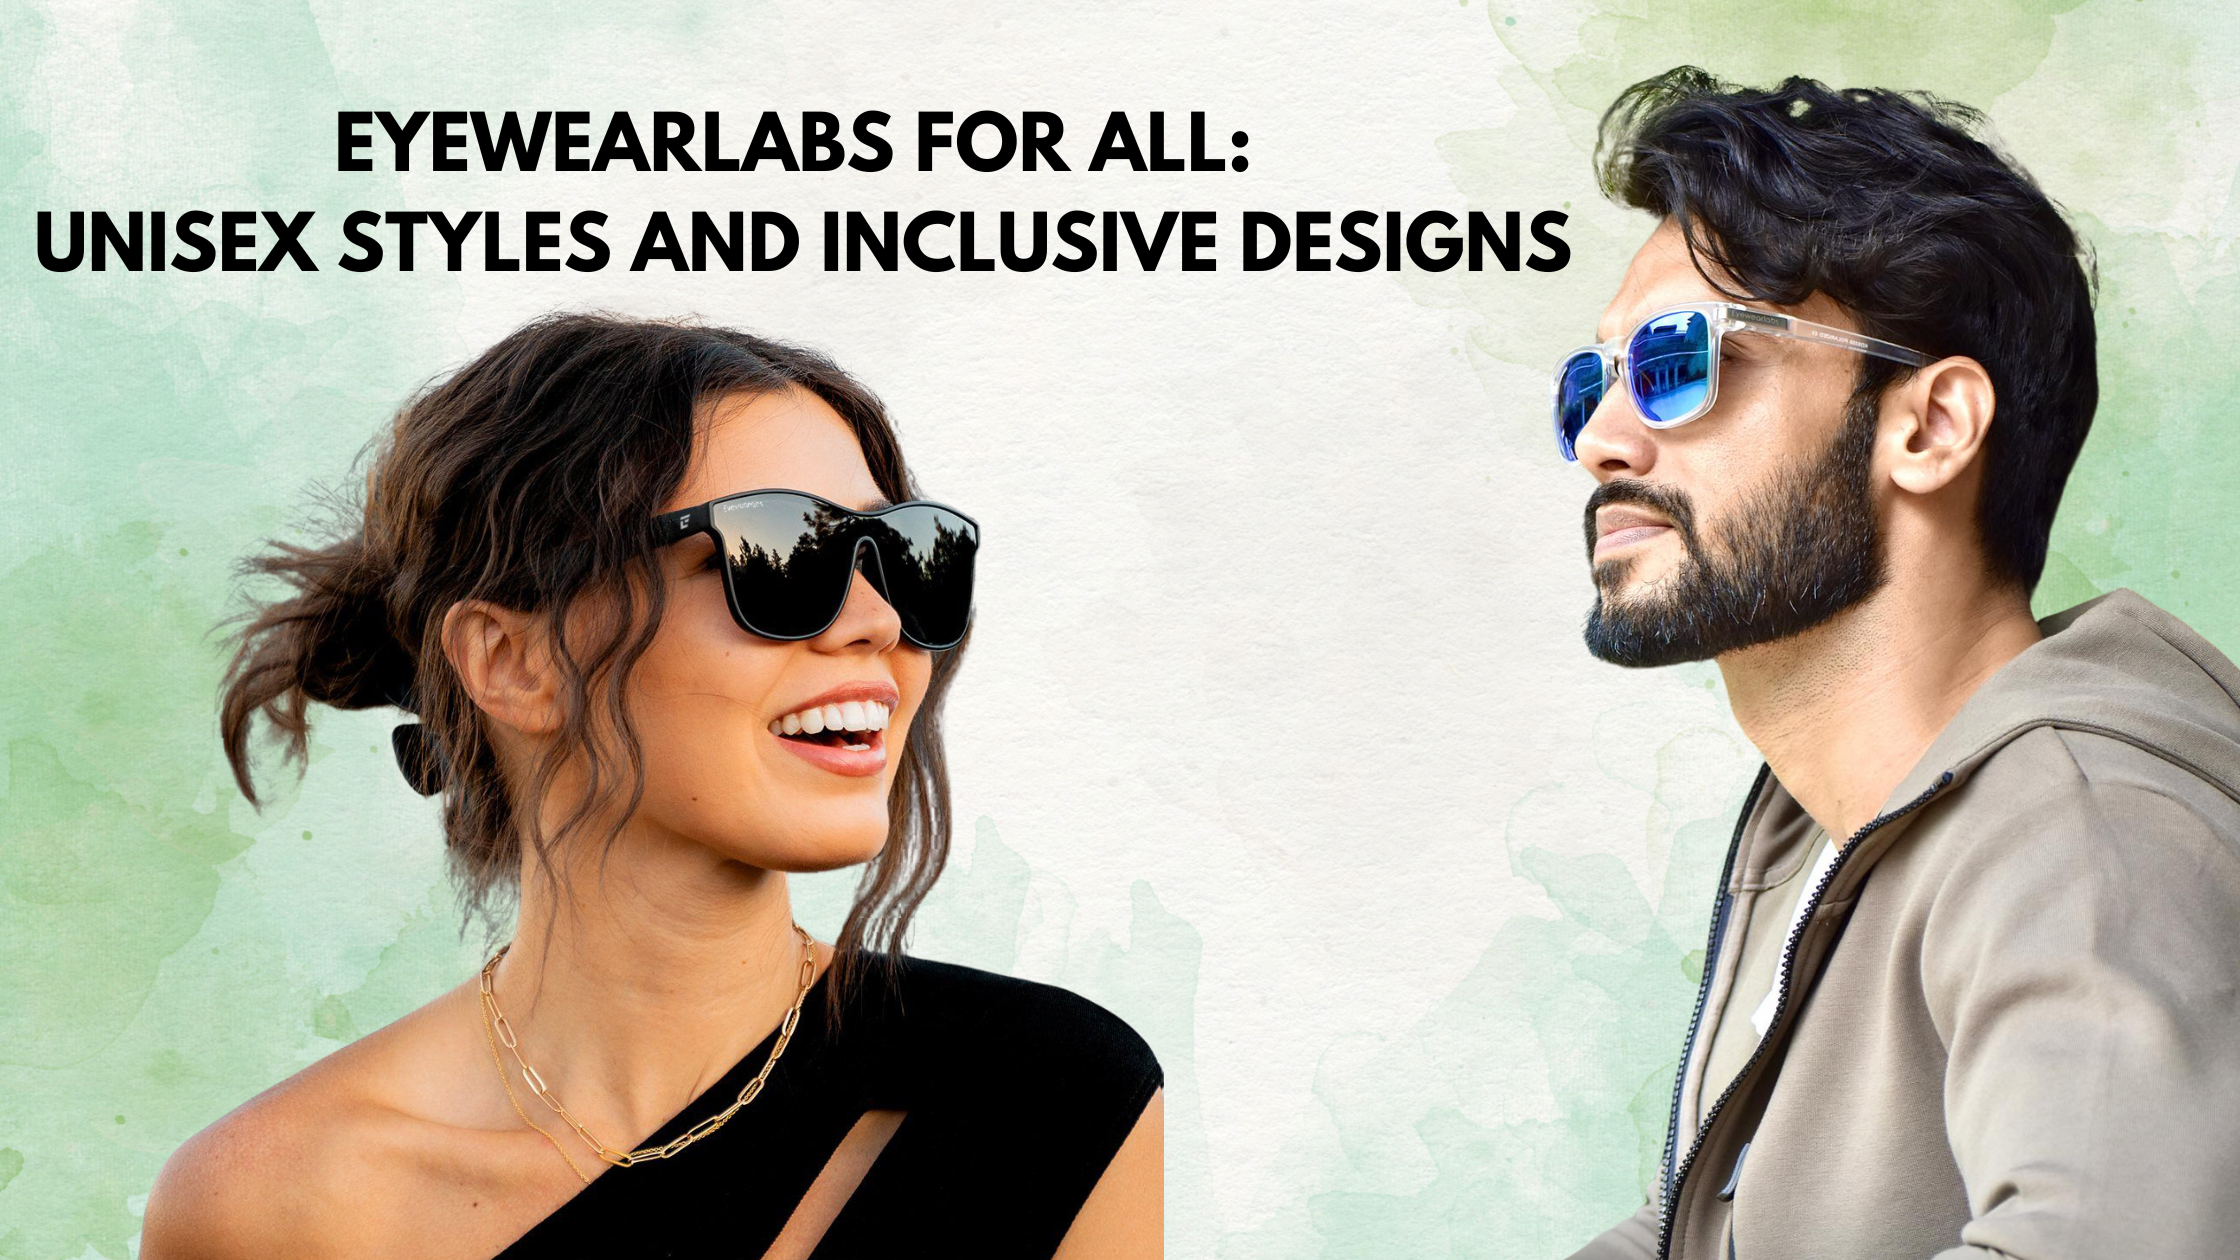 Eyewearlabs for All: Unisex Styles and Inclusive Designs